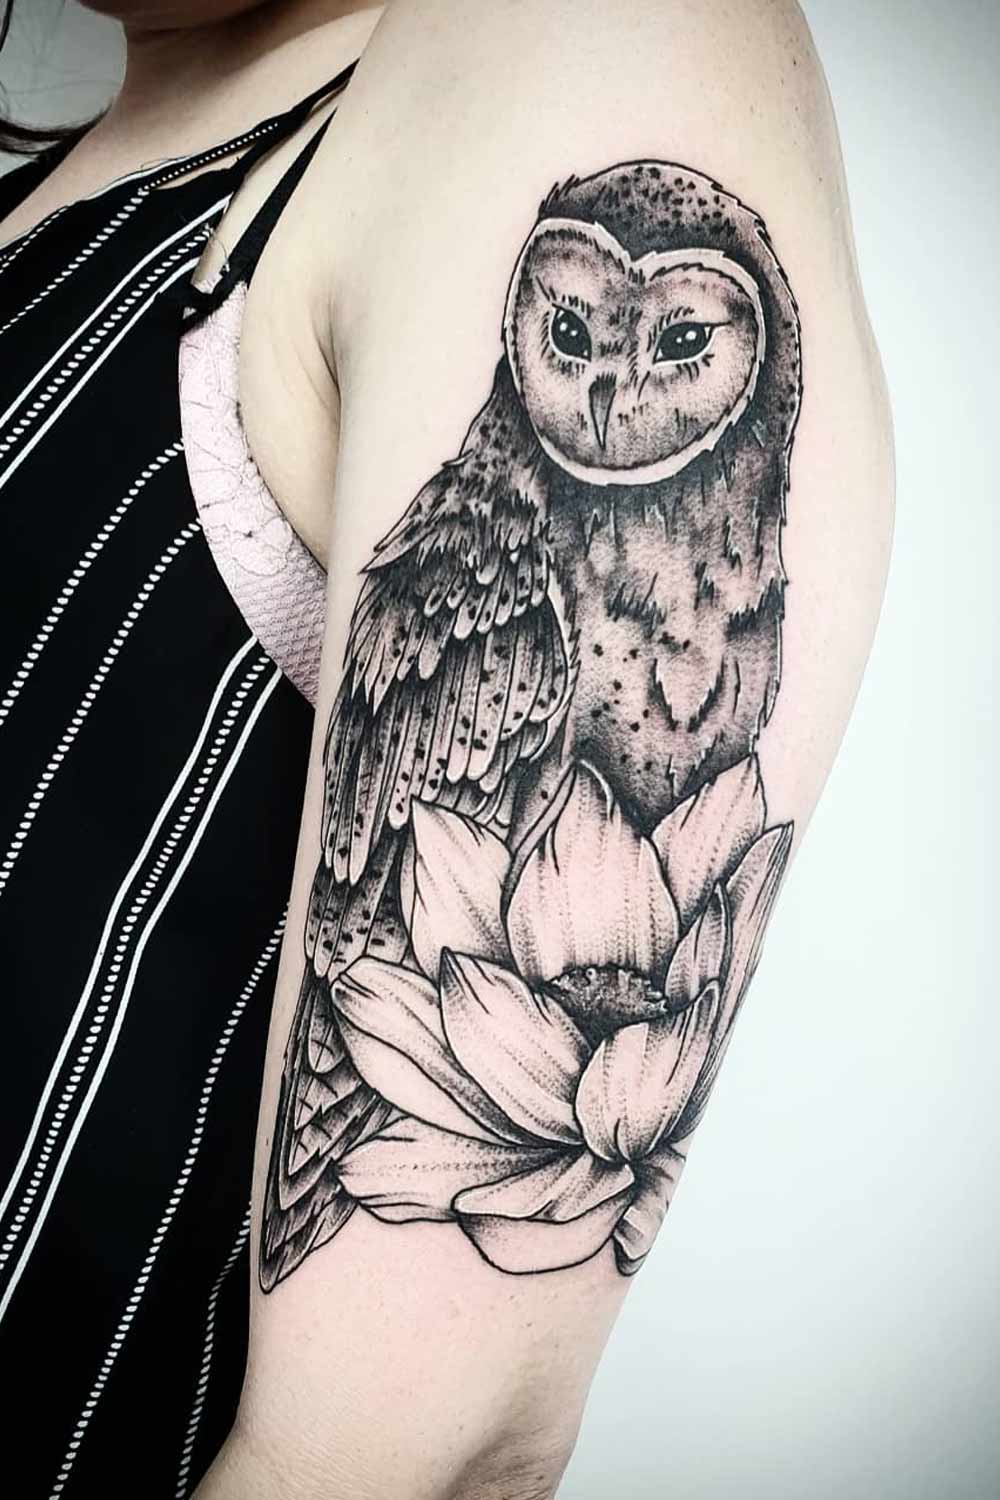 Buy Small Owl Temporary Tattoo Online in India - Etsy